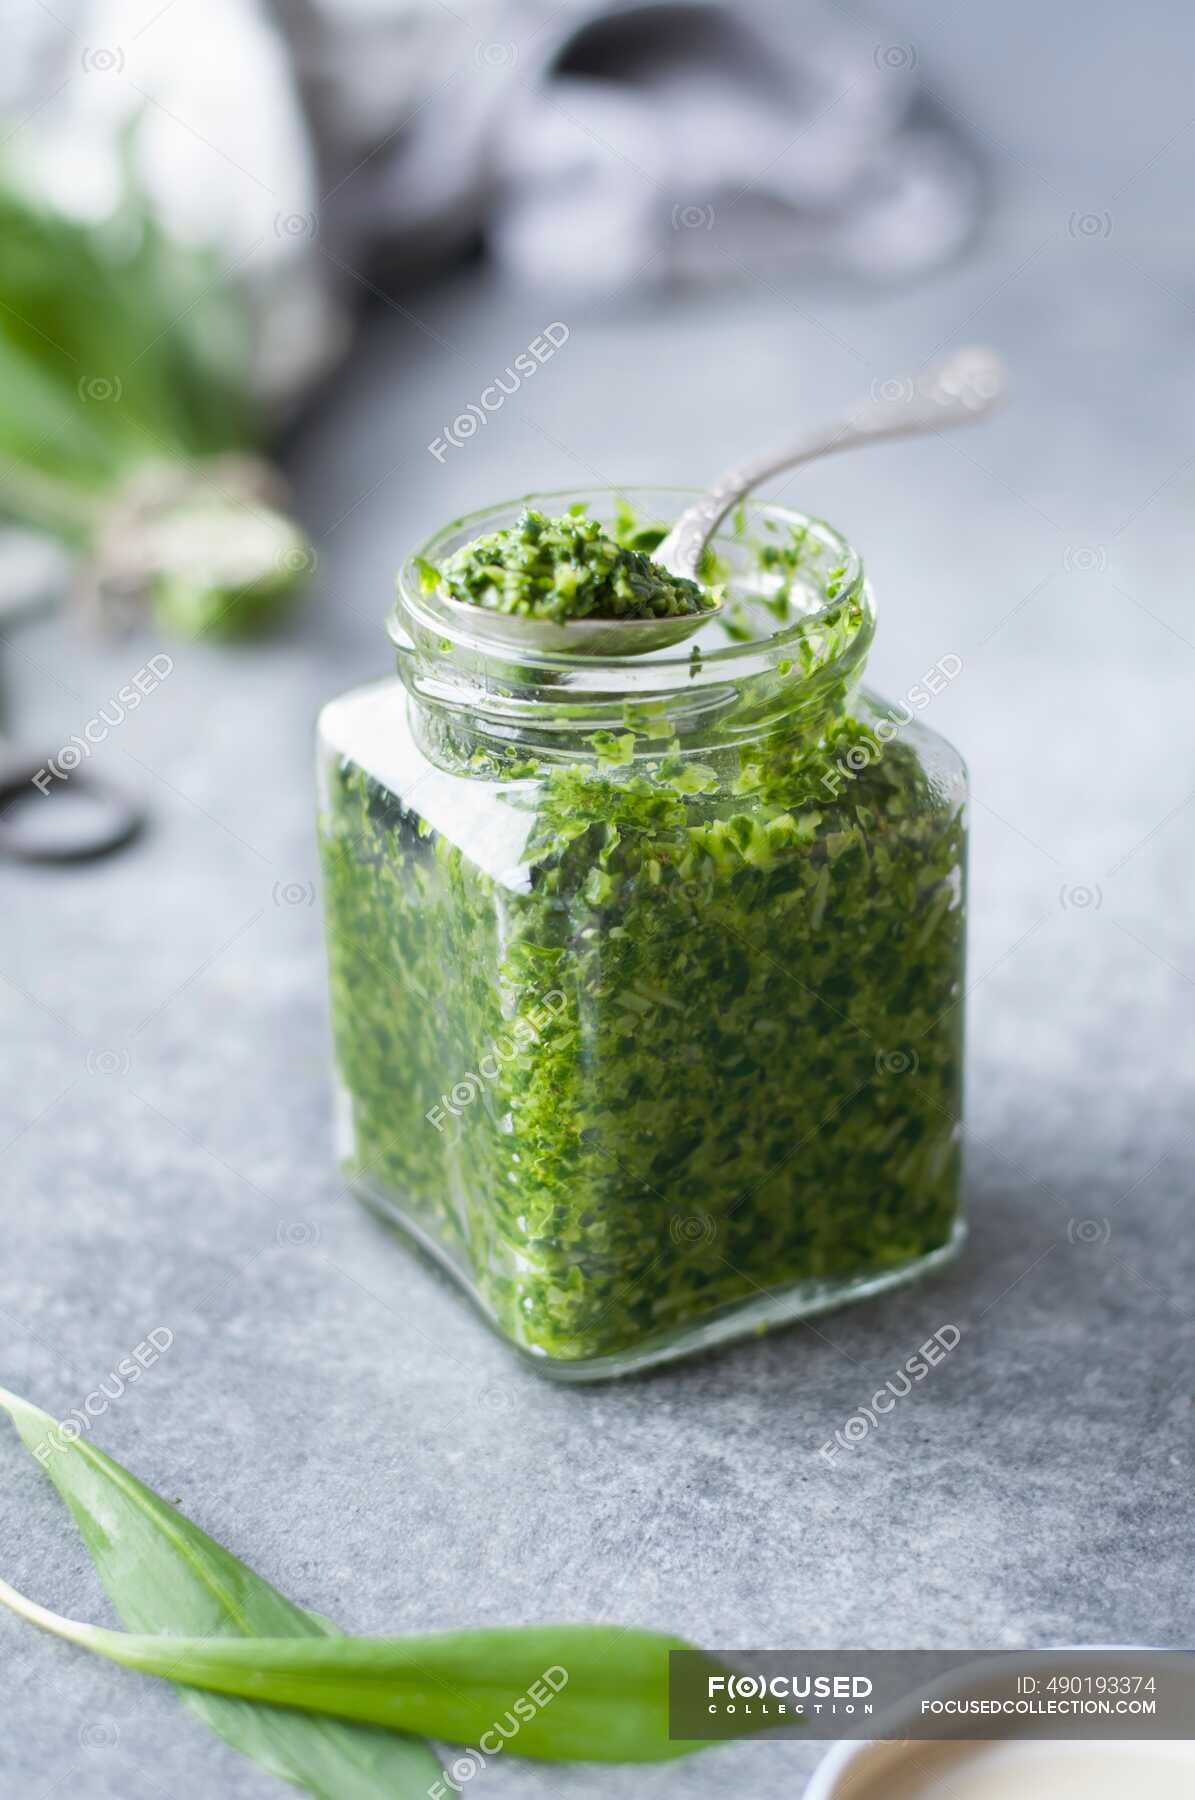 reductor Norm Foster Green pesto sauce in glass jar on table — greyly, eruca vesicaria - Stock  Photo | #490193374